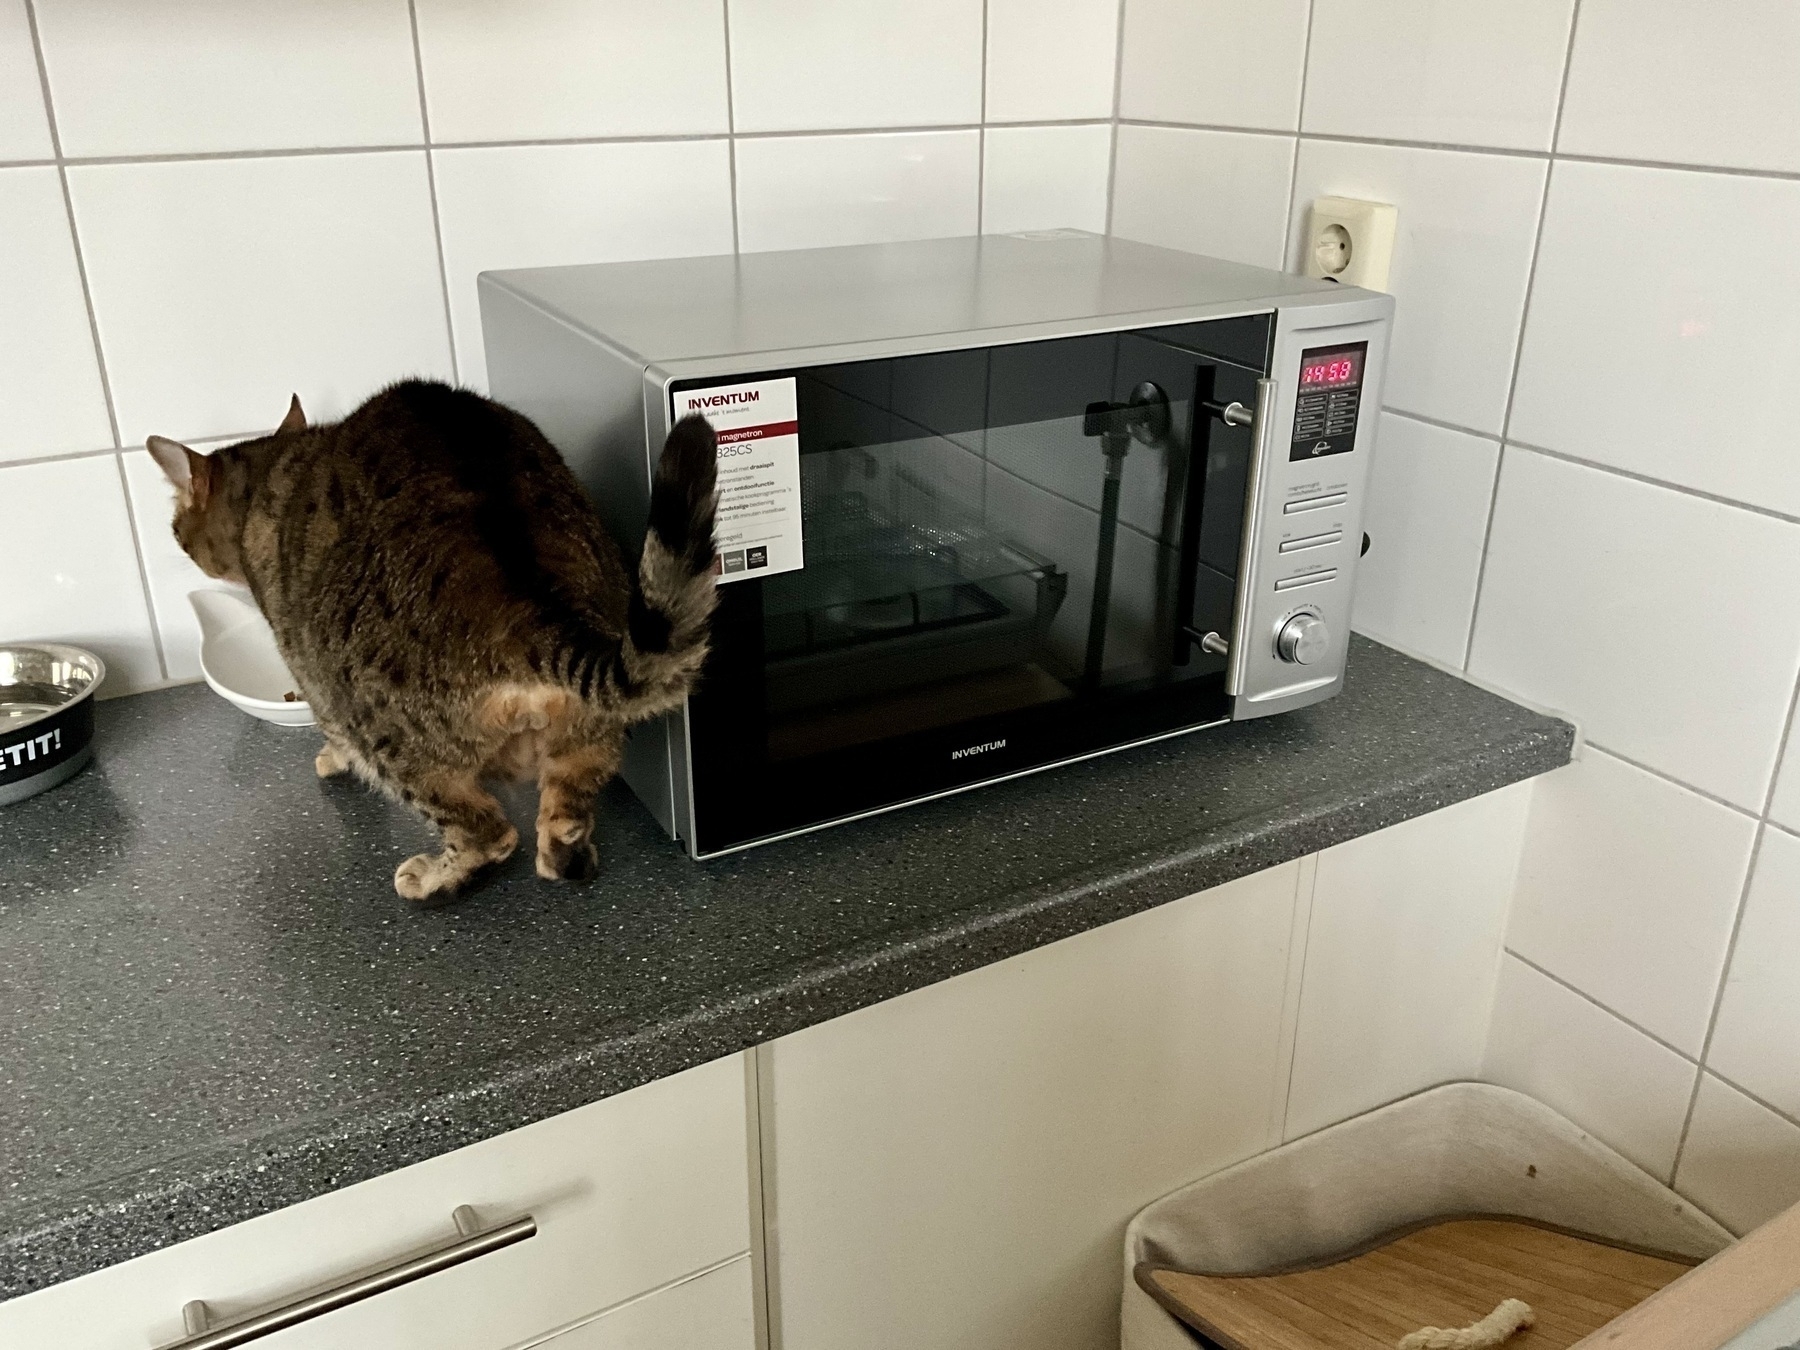 cat eating food next to microwave oven